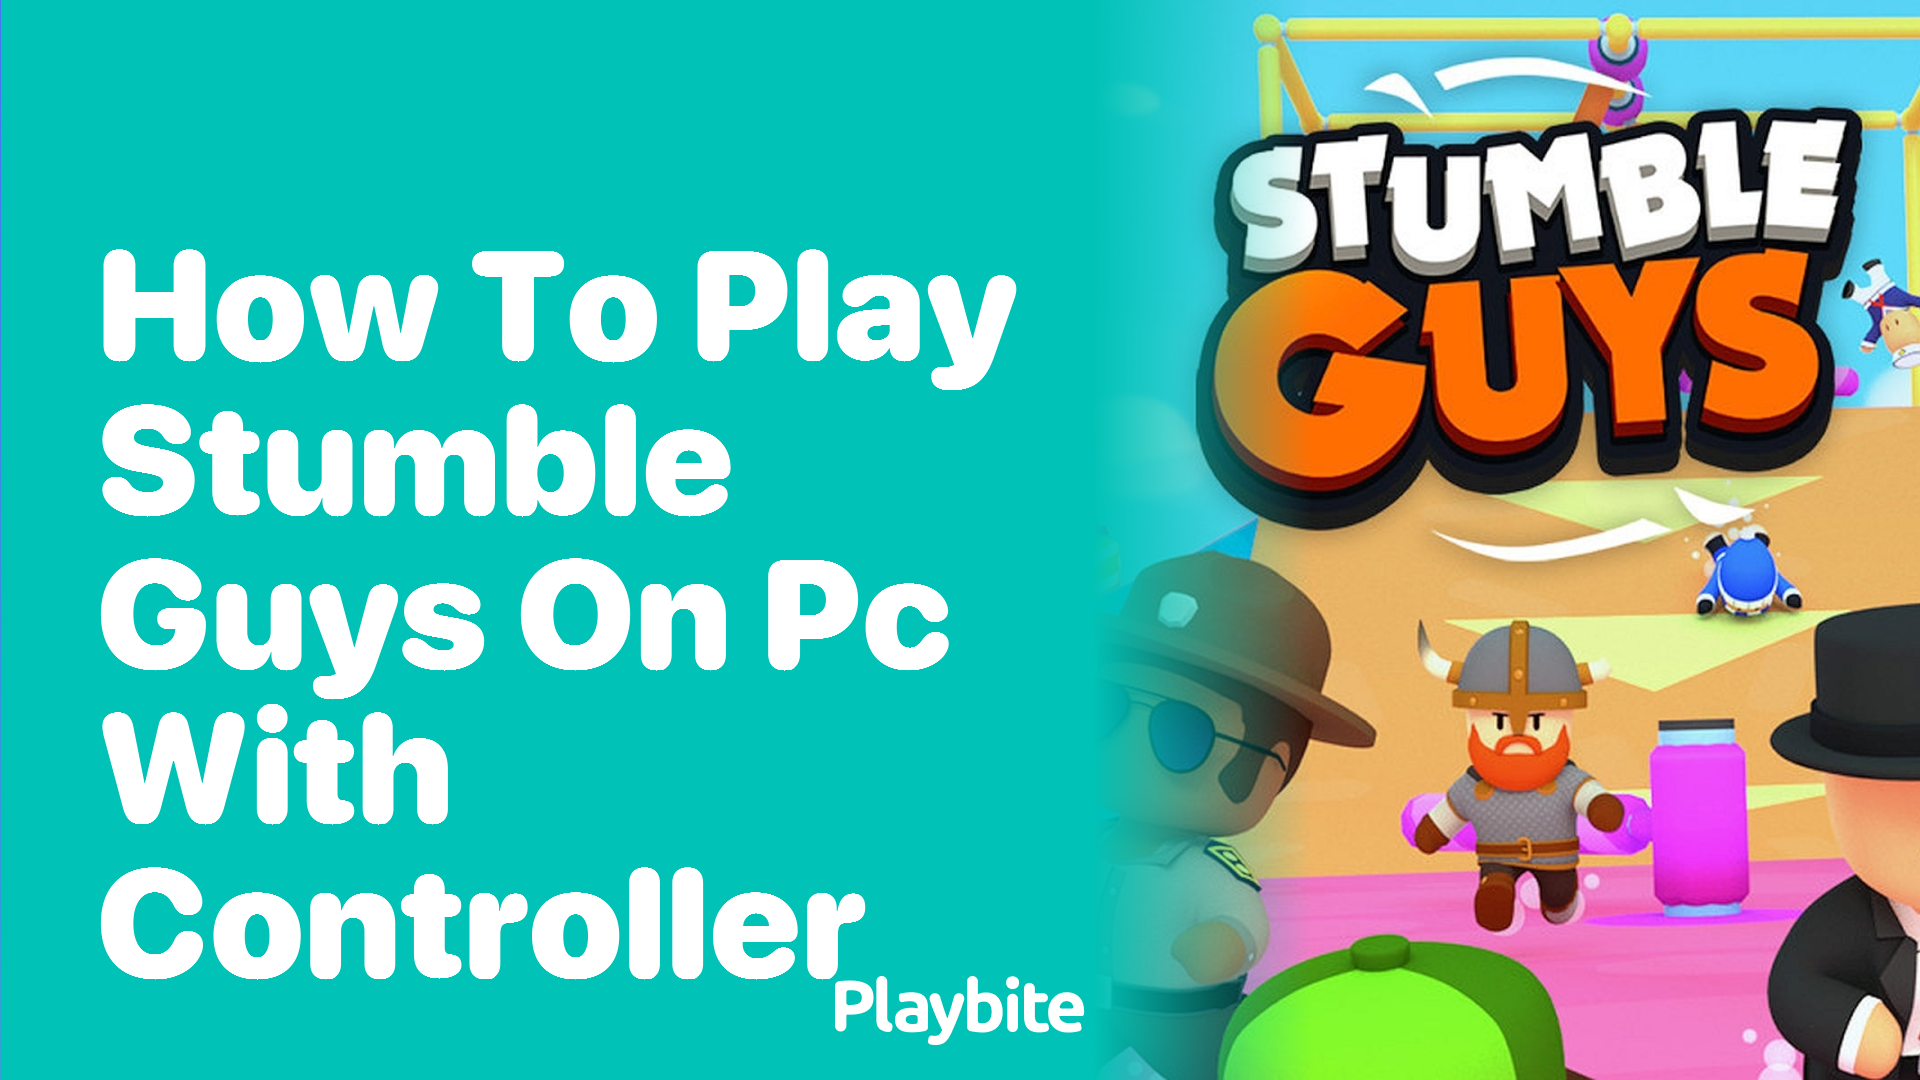 How to Play Stumble Guys on PC with a Controller